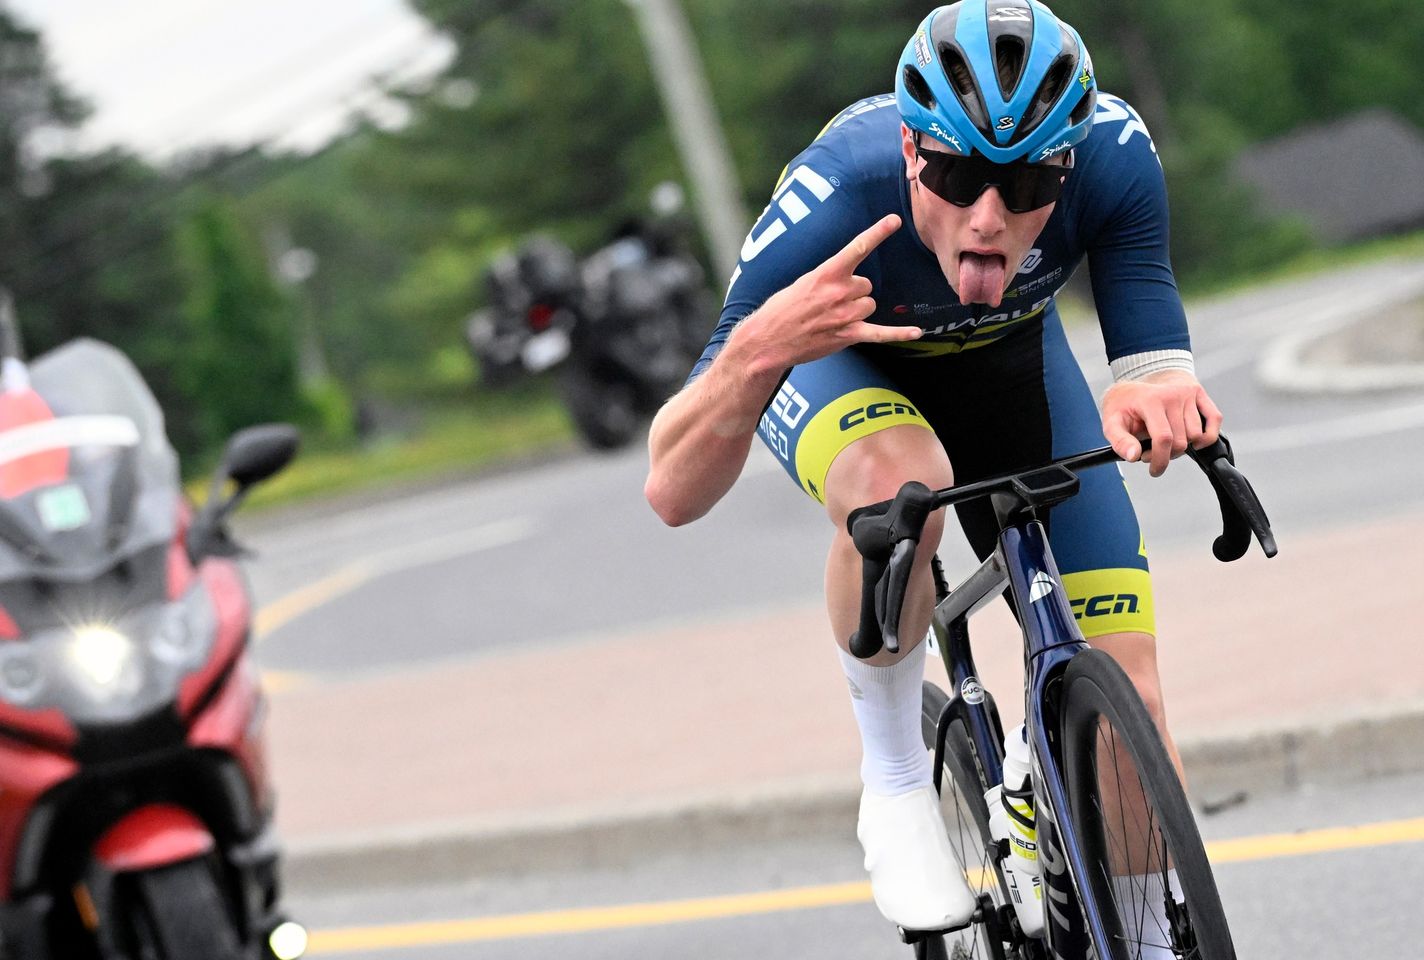 X-Speed United’s George Radcliffe Shines at Tour de Beauce